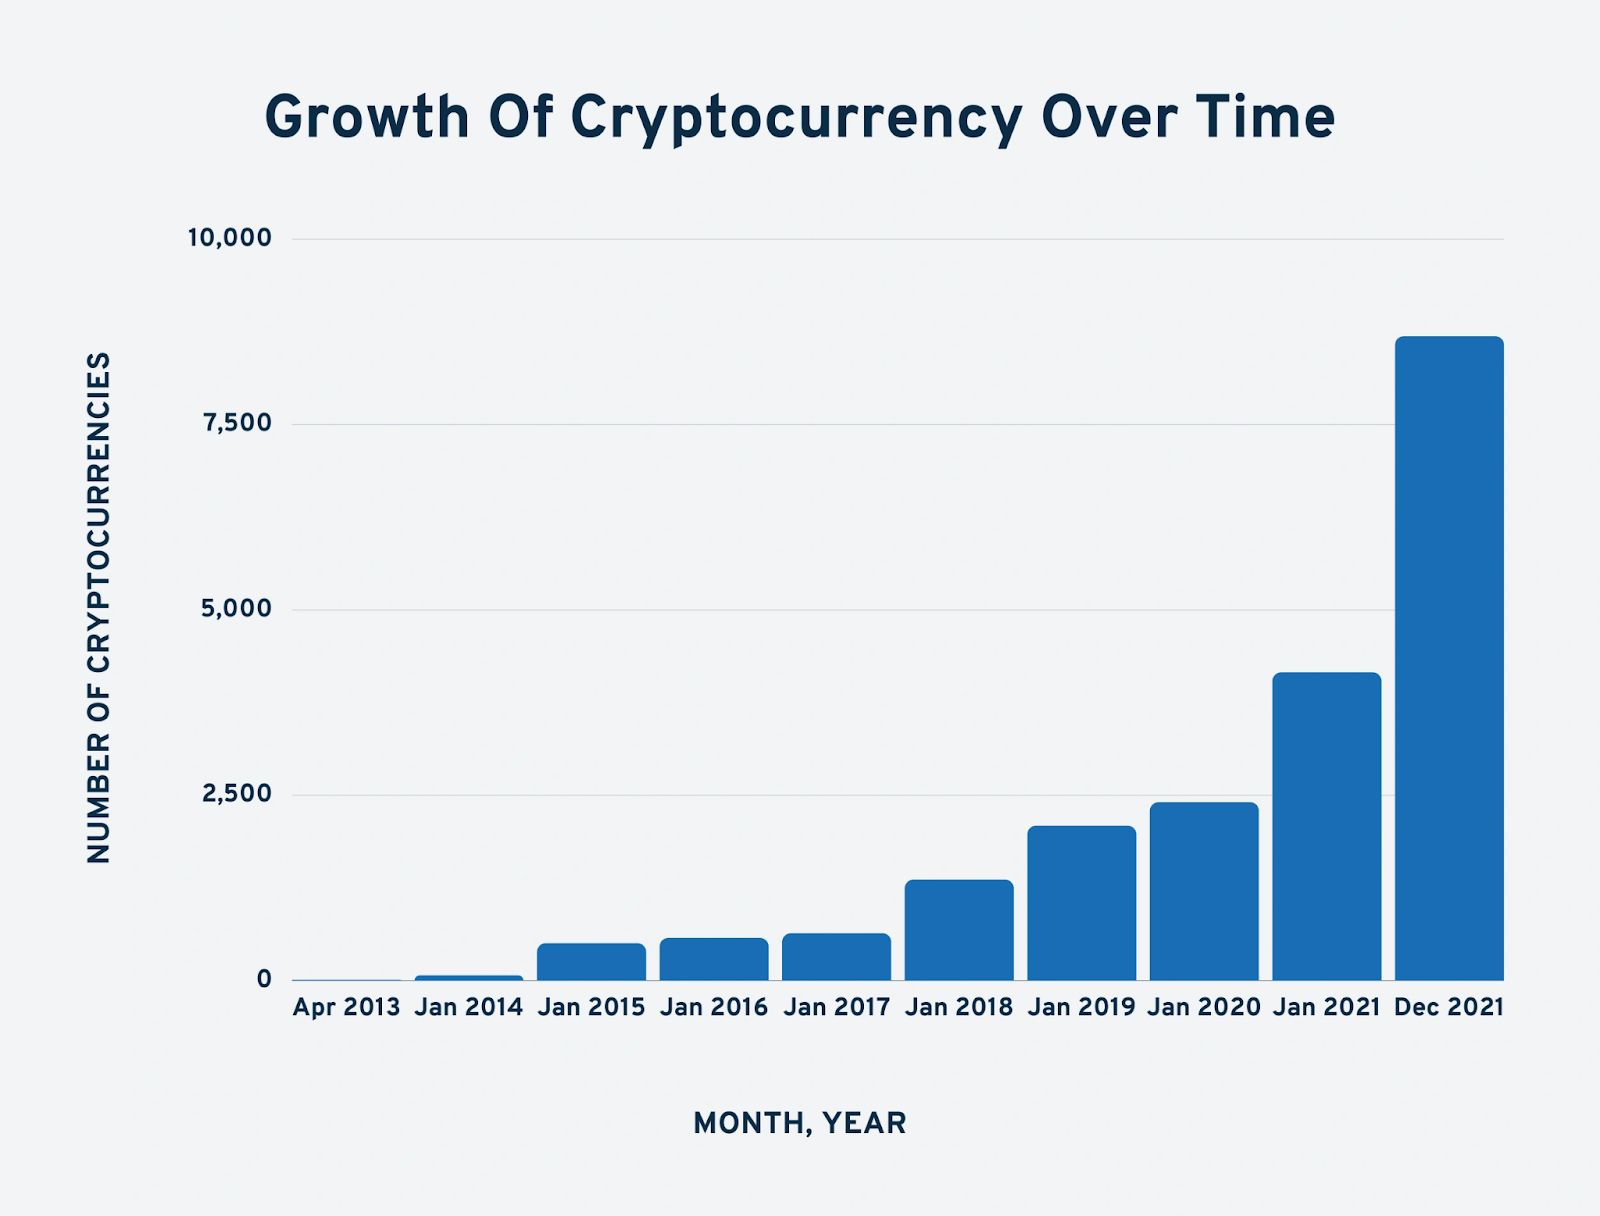 Number of cryptocurrencies over time. Source: explodingtopics.com/blog/number-of-cryptocurrencies